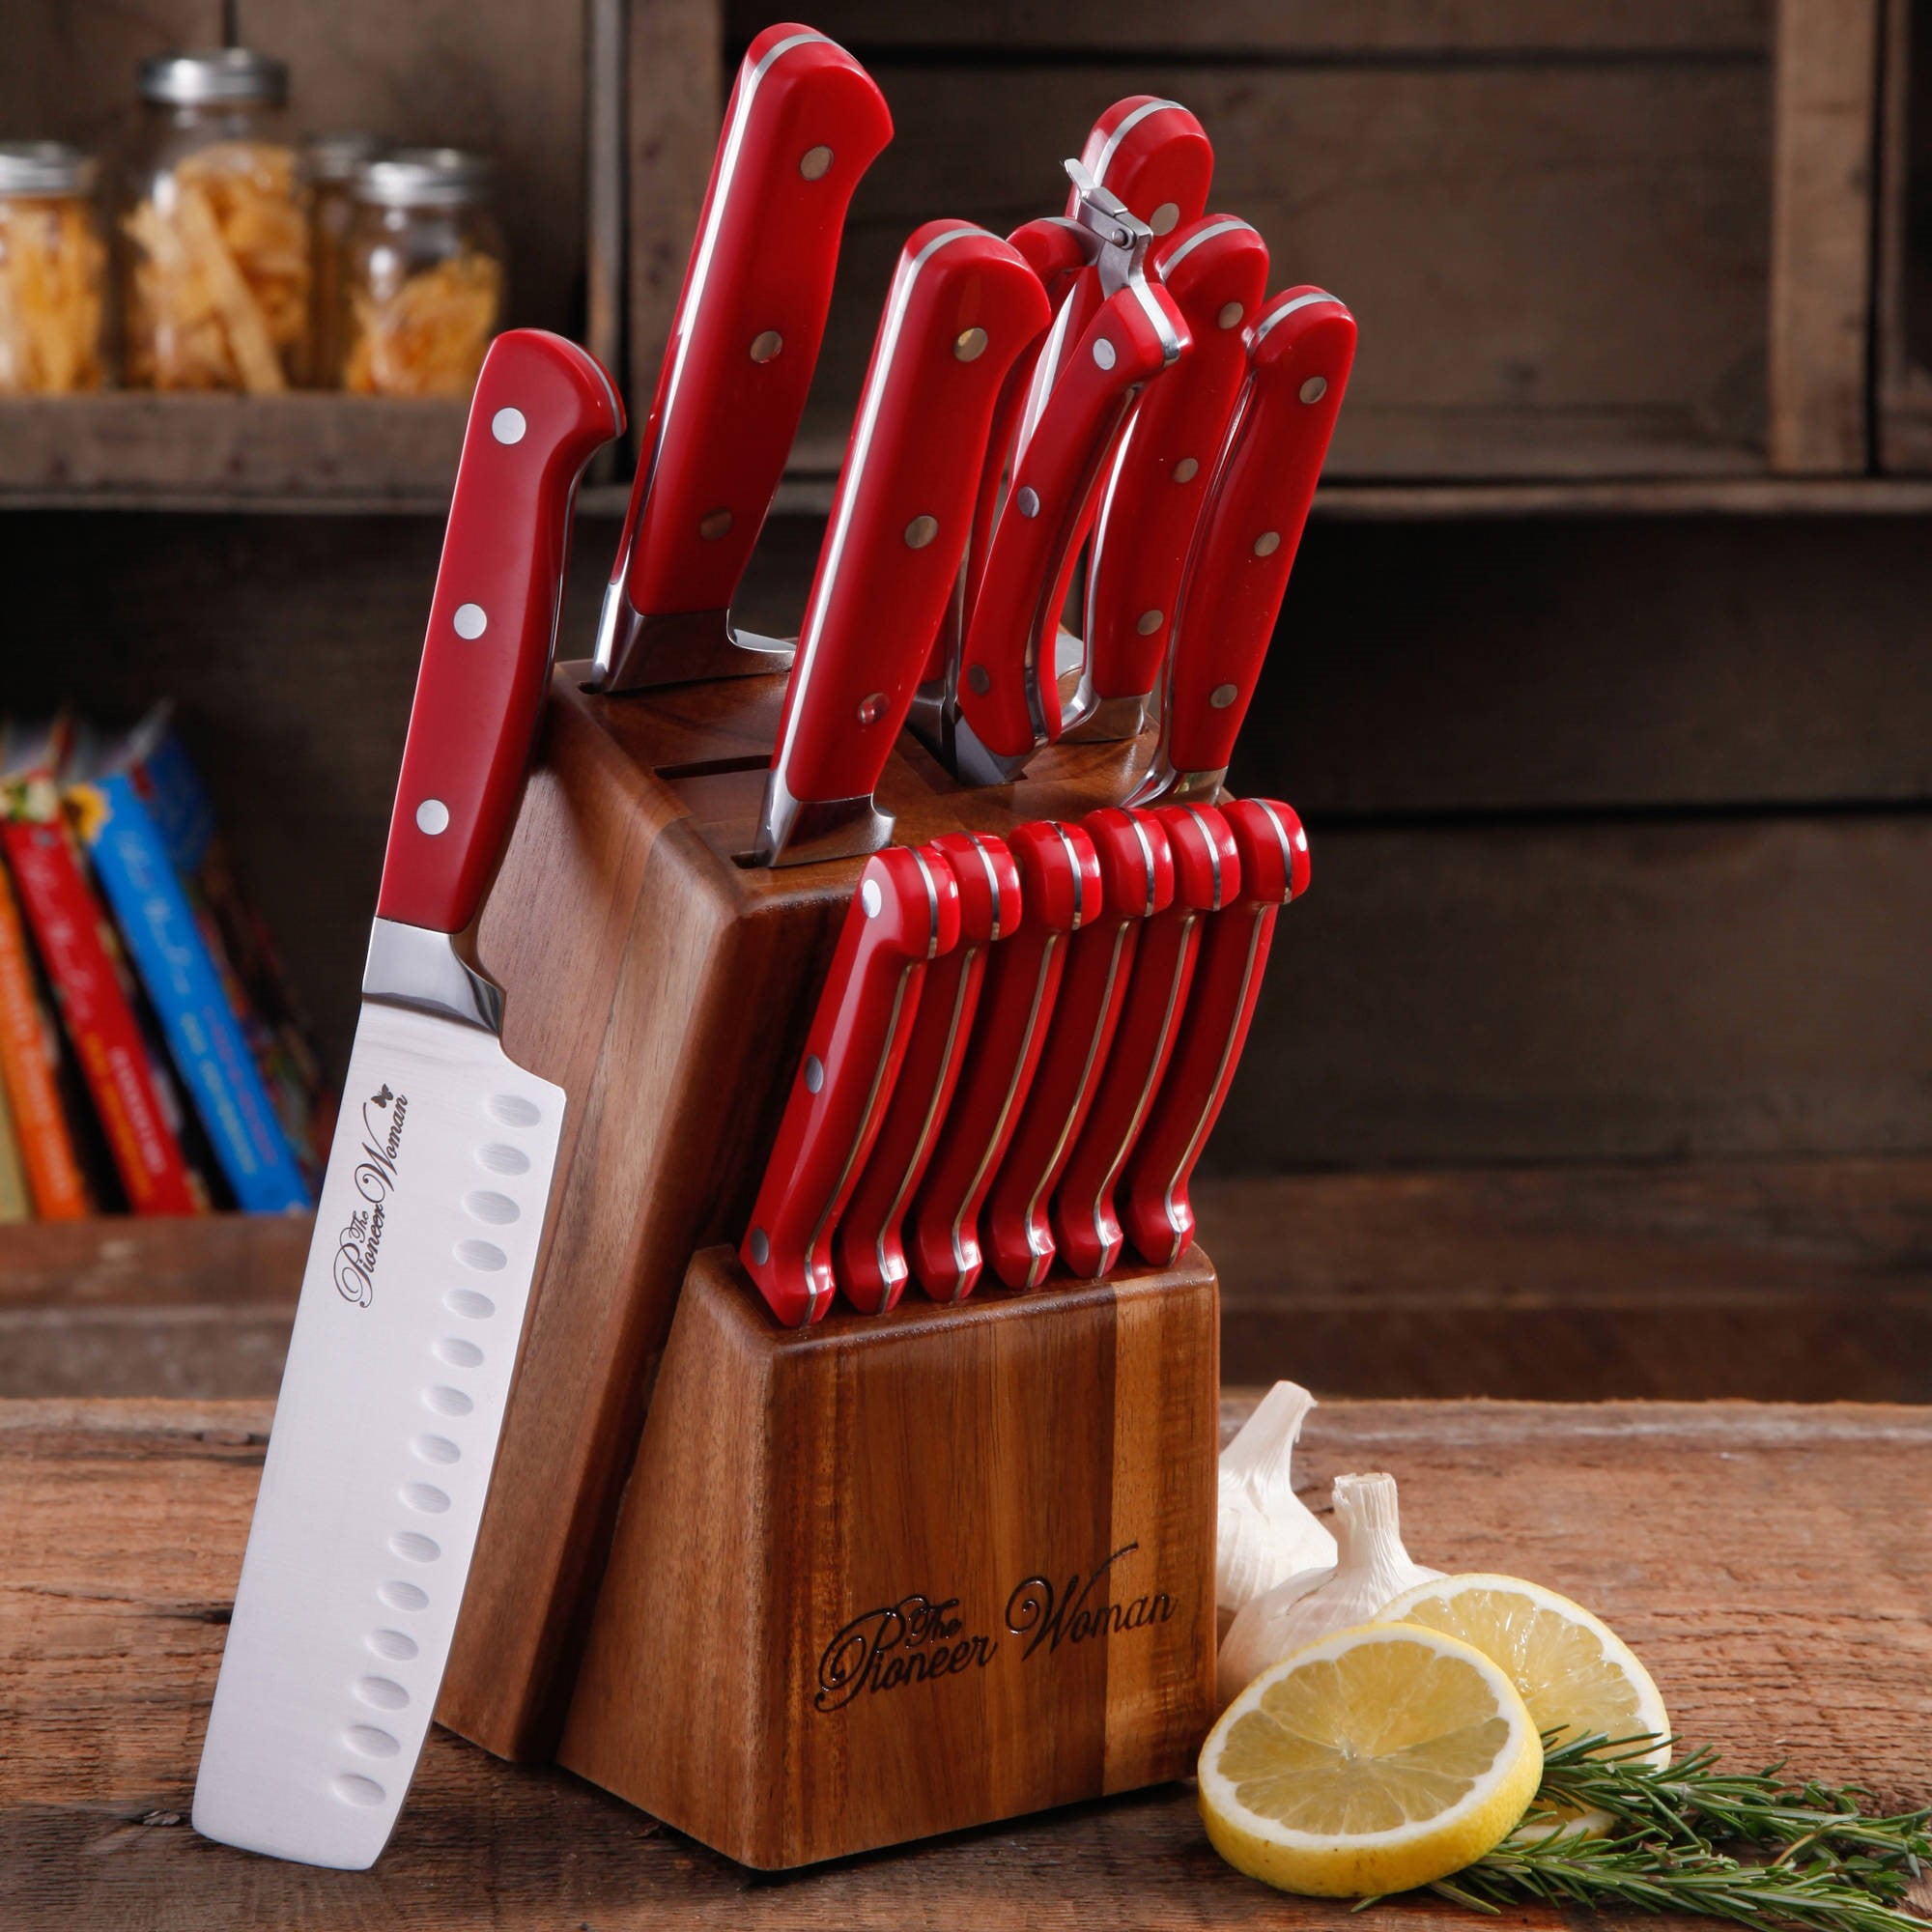 The Pioneer Woman Frontier Collection 14-Piece Cutlery Set with Wood Block,  Red for Sale in Lakewood, WA - OfferUp